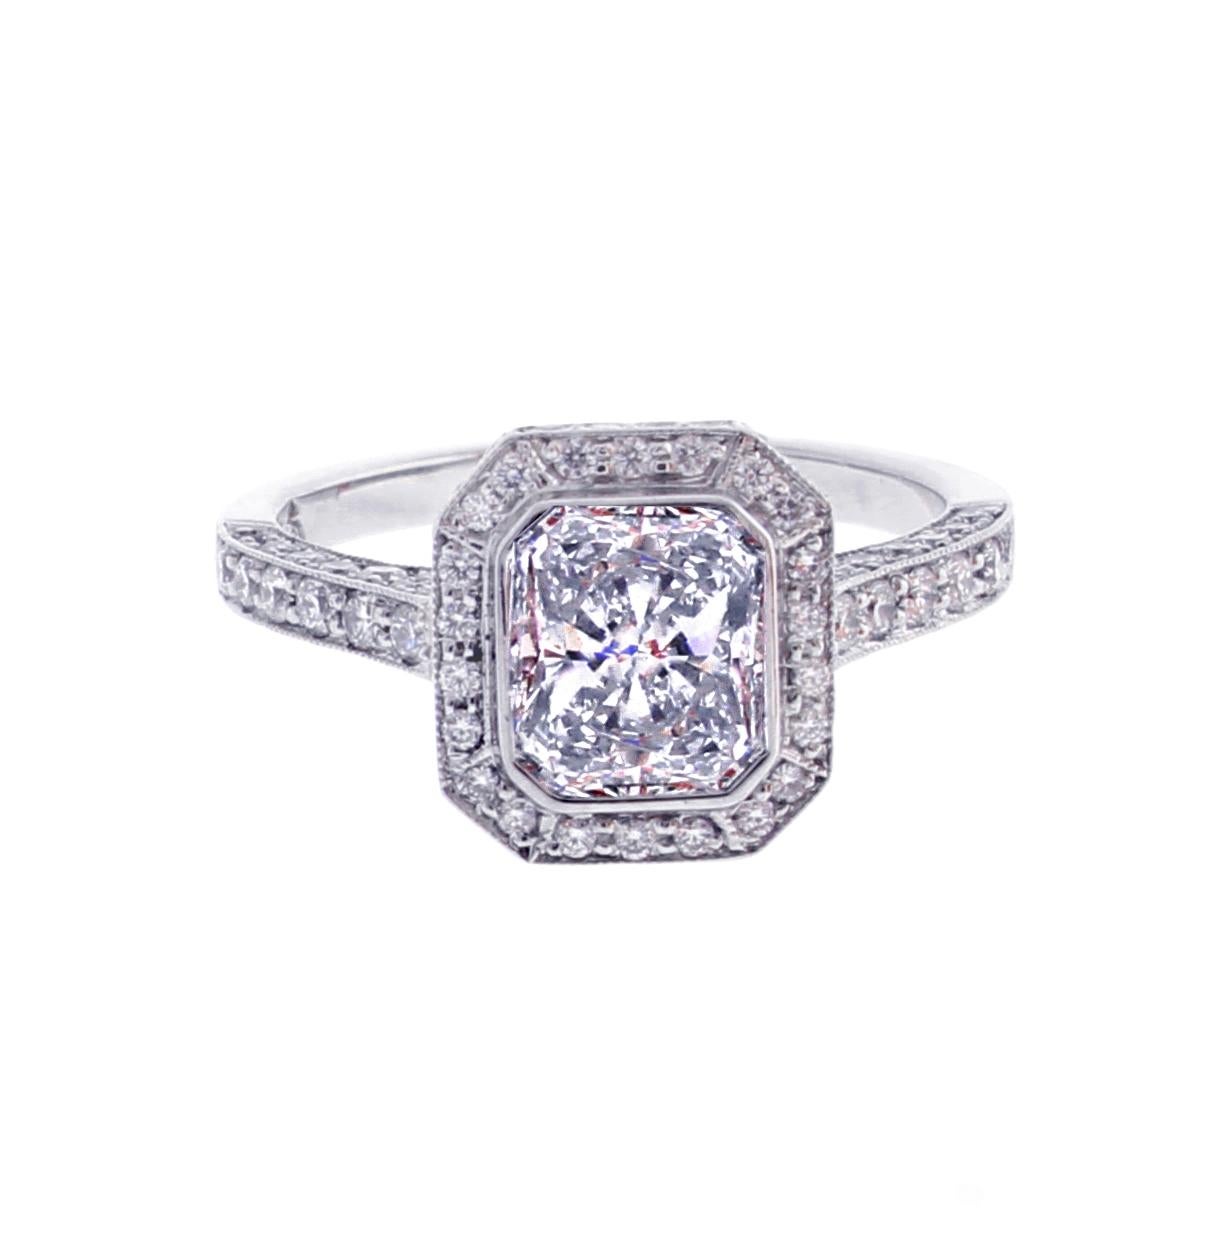 From the Master ring makers of Pampillonia Jewelers a radiant cut diamond framed by by brilliant diamonds. The diamonds are meticulously set on all three sides.
♦ Designer: Pampillonia
♦ Metal: Platinum
♦ Diamond=1.51 E color SI1 clarity  GIA